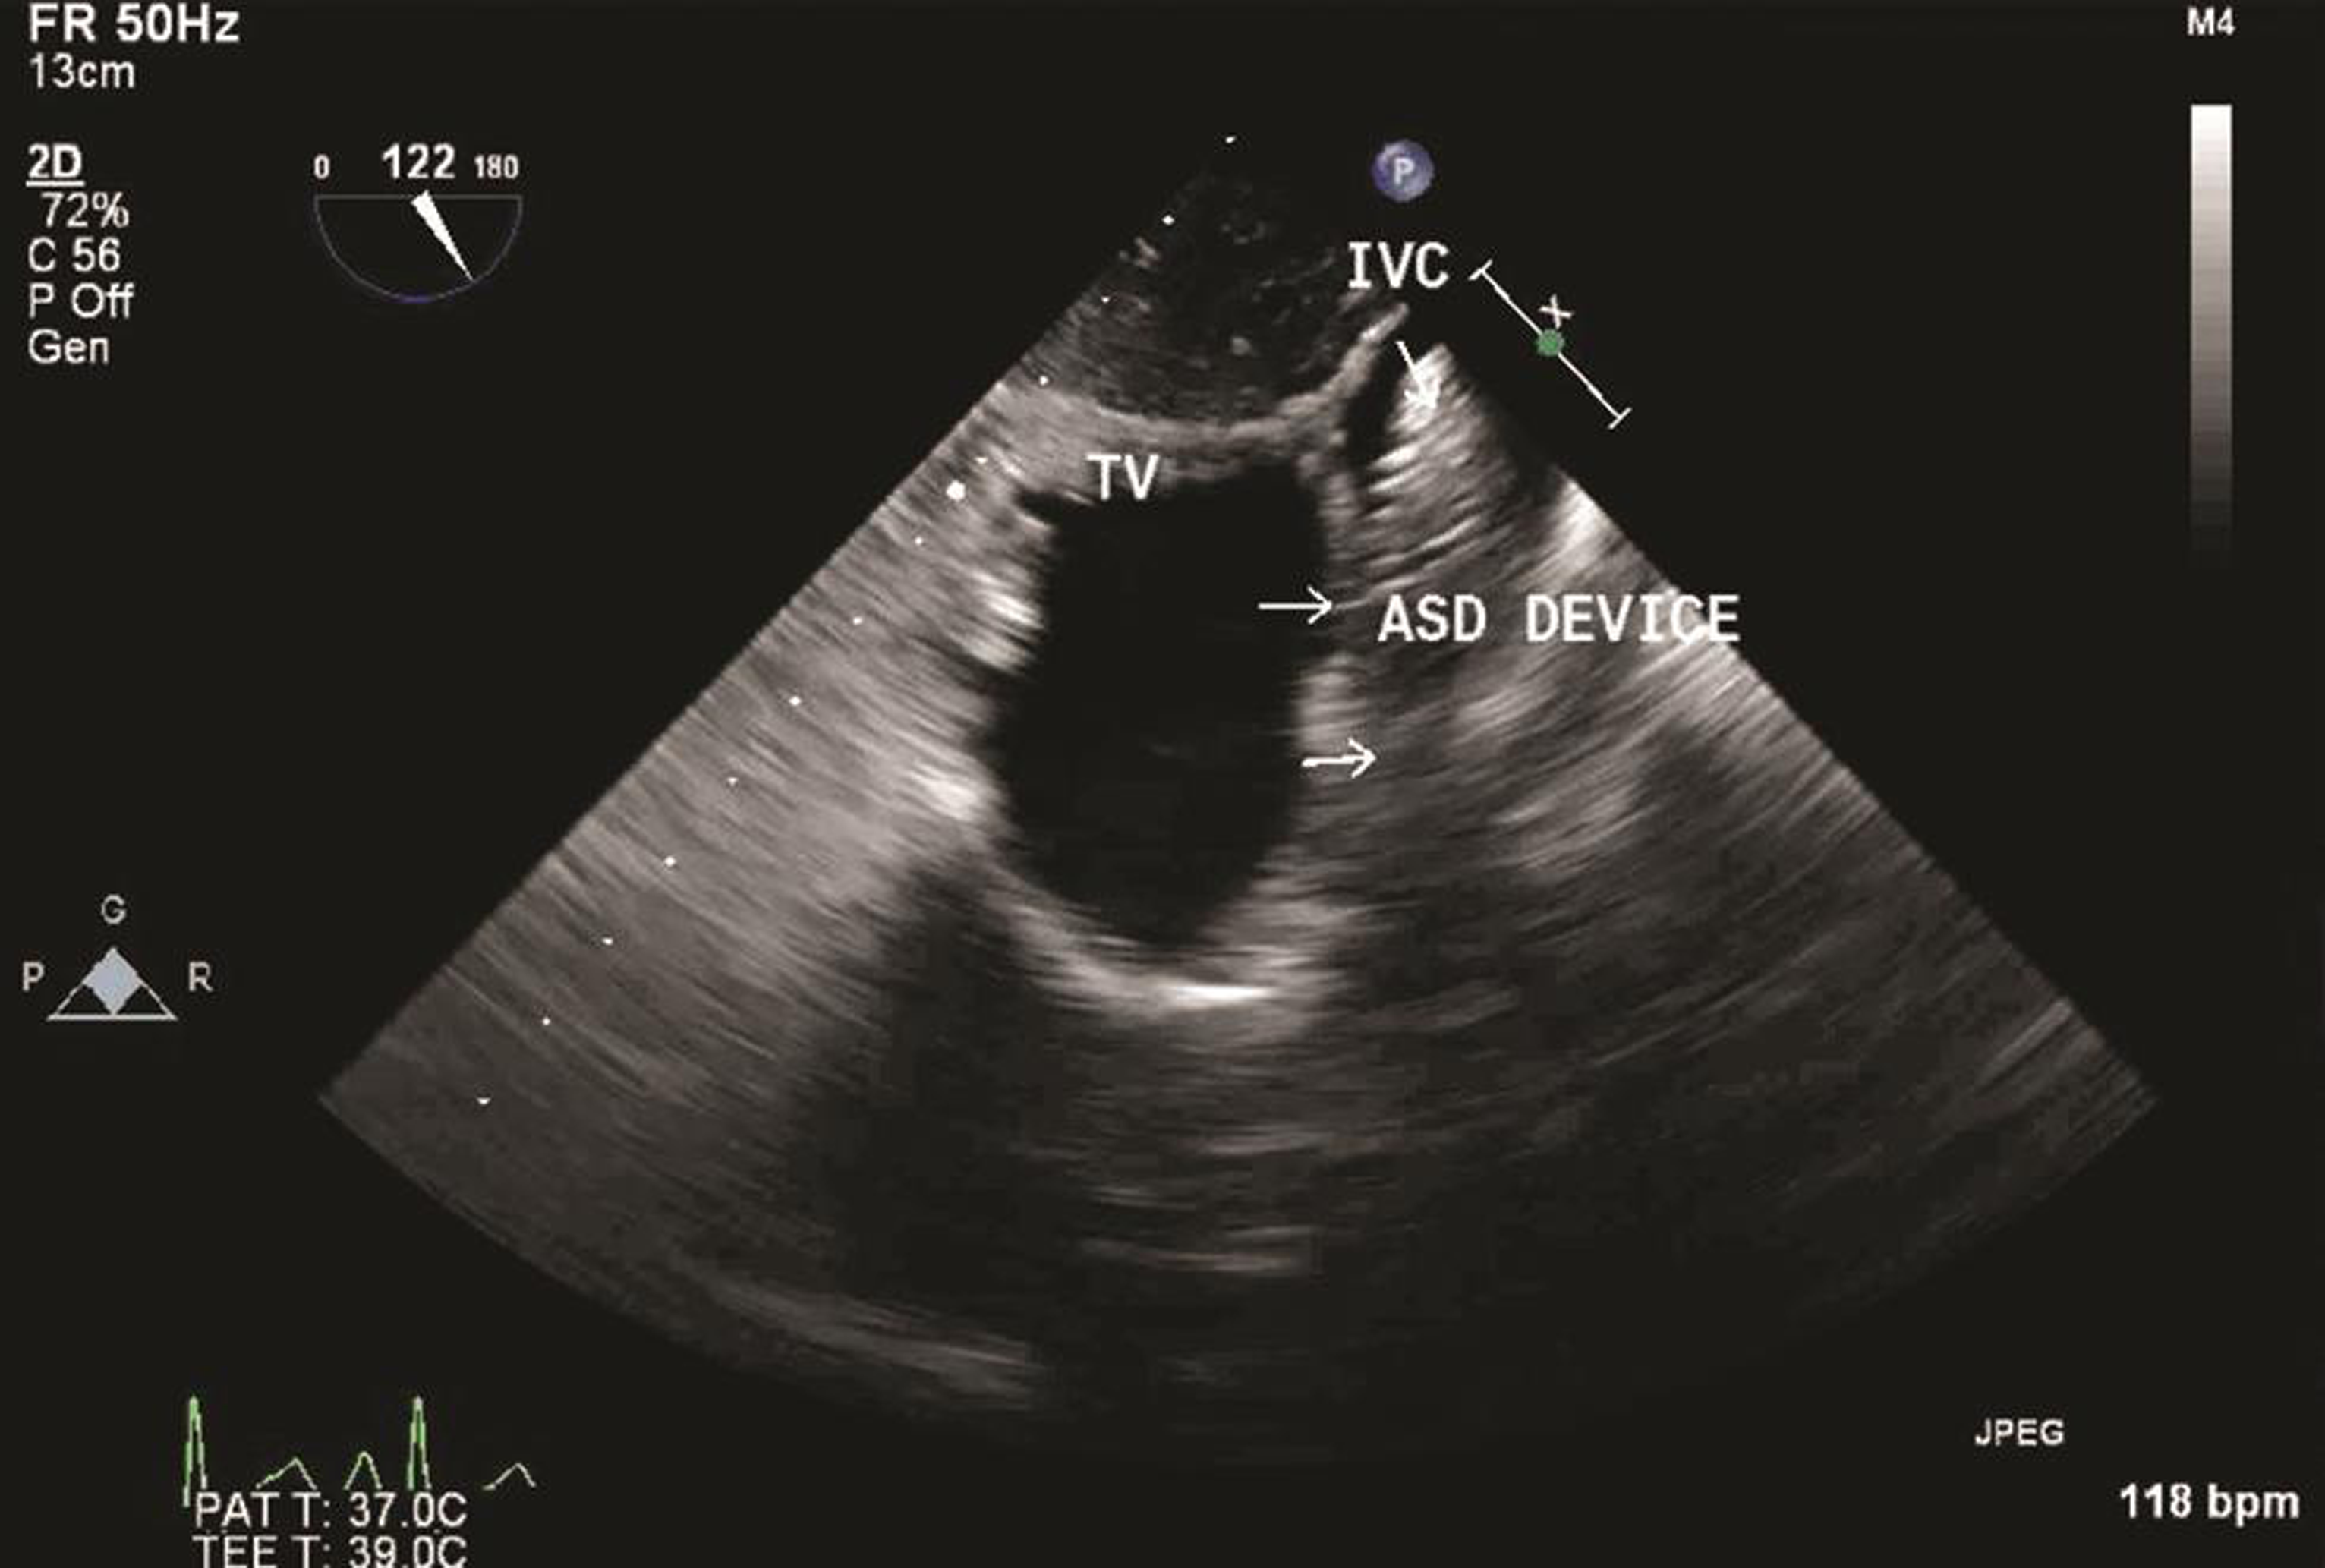 Transesophageal echocardiography transgastric right ventricle inflow–outflow view, showing impingement of atrial septal defect (ASD) device occluder on IVC right atrium junction. Abbreviations: ASD, atrial septal defect; IVC, inferior vena cava.